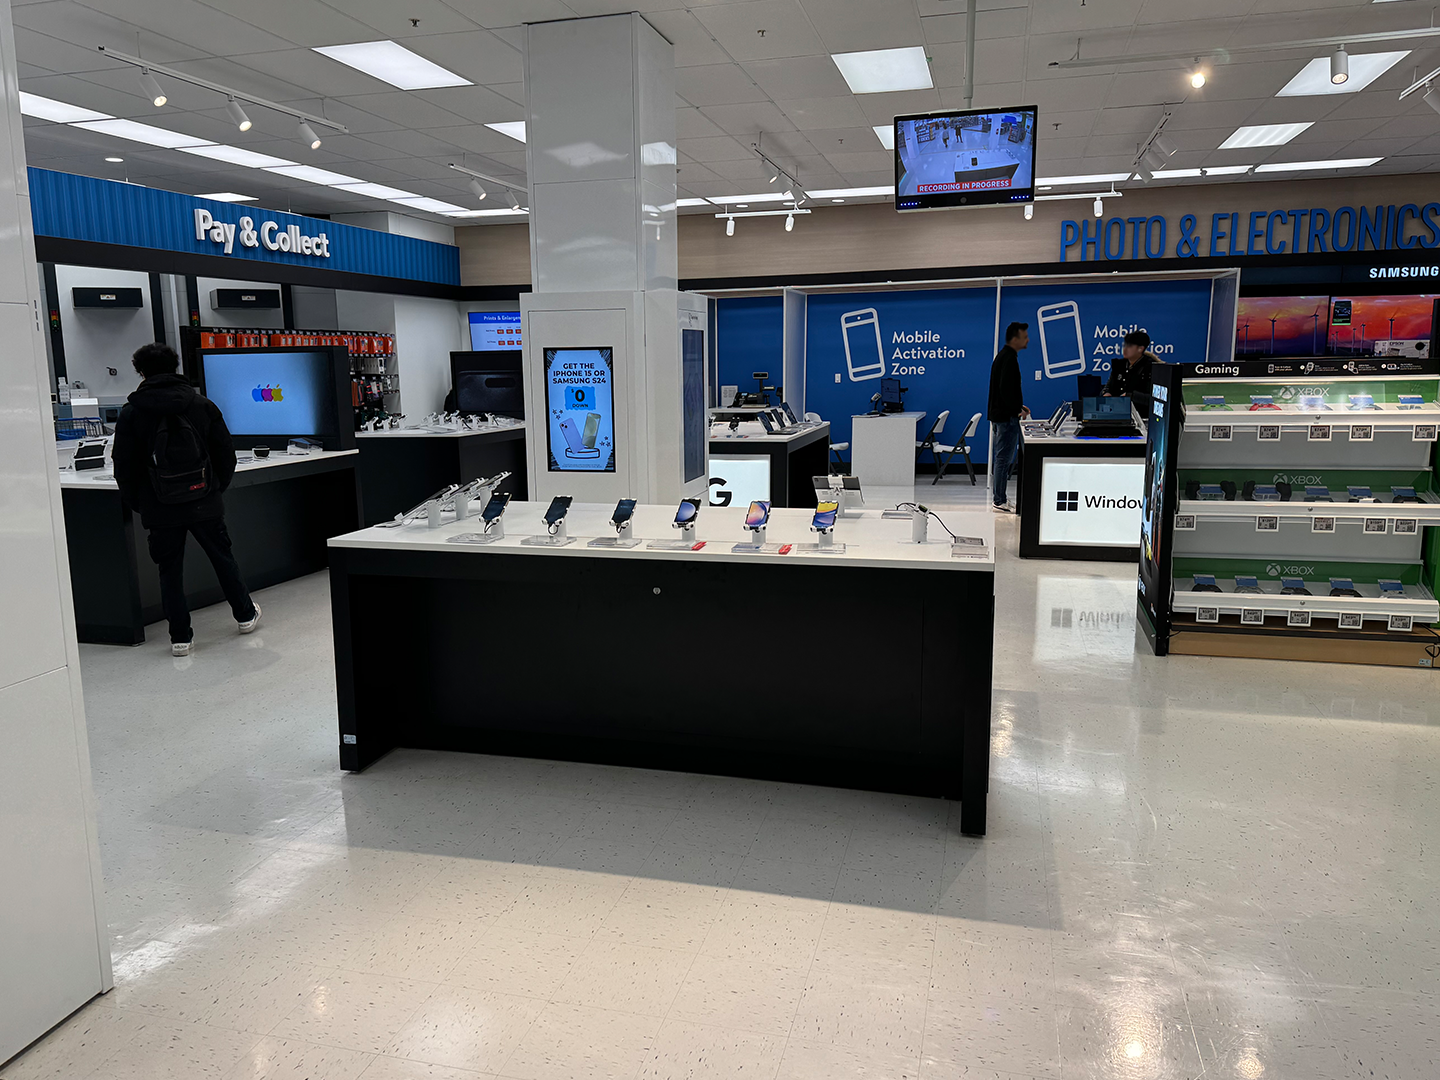 Front view of the custom electronic department displays at Walmart